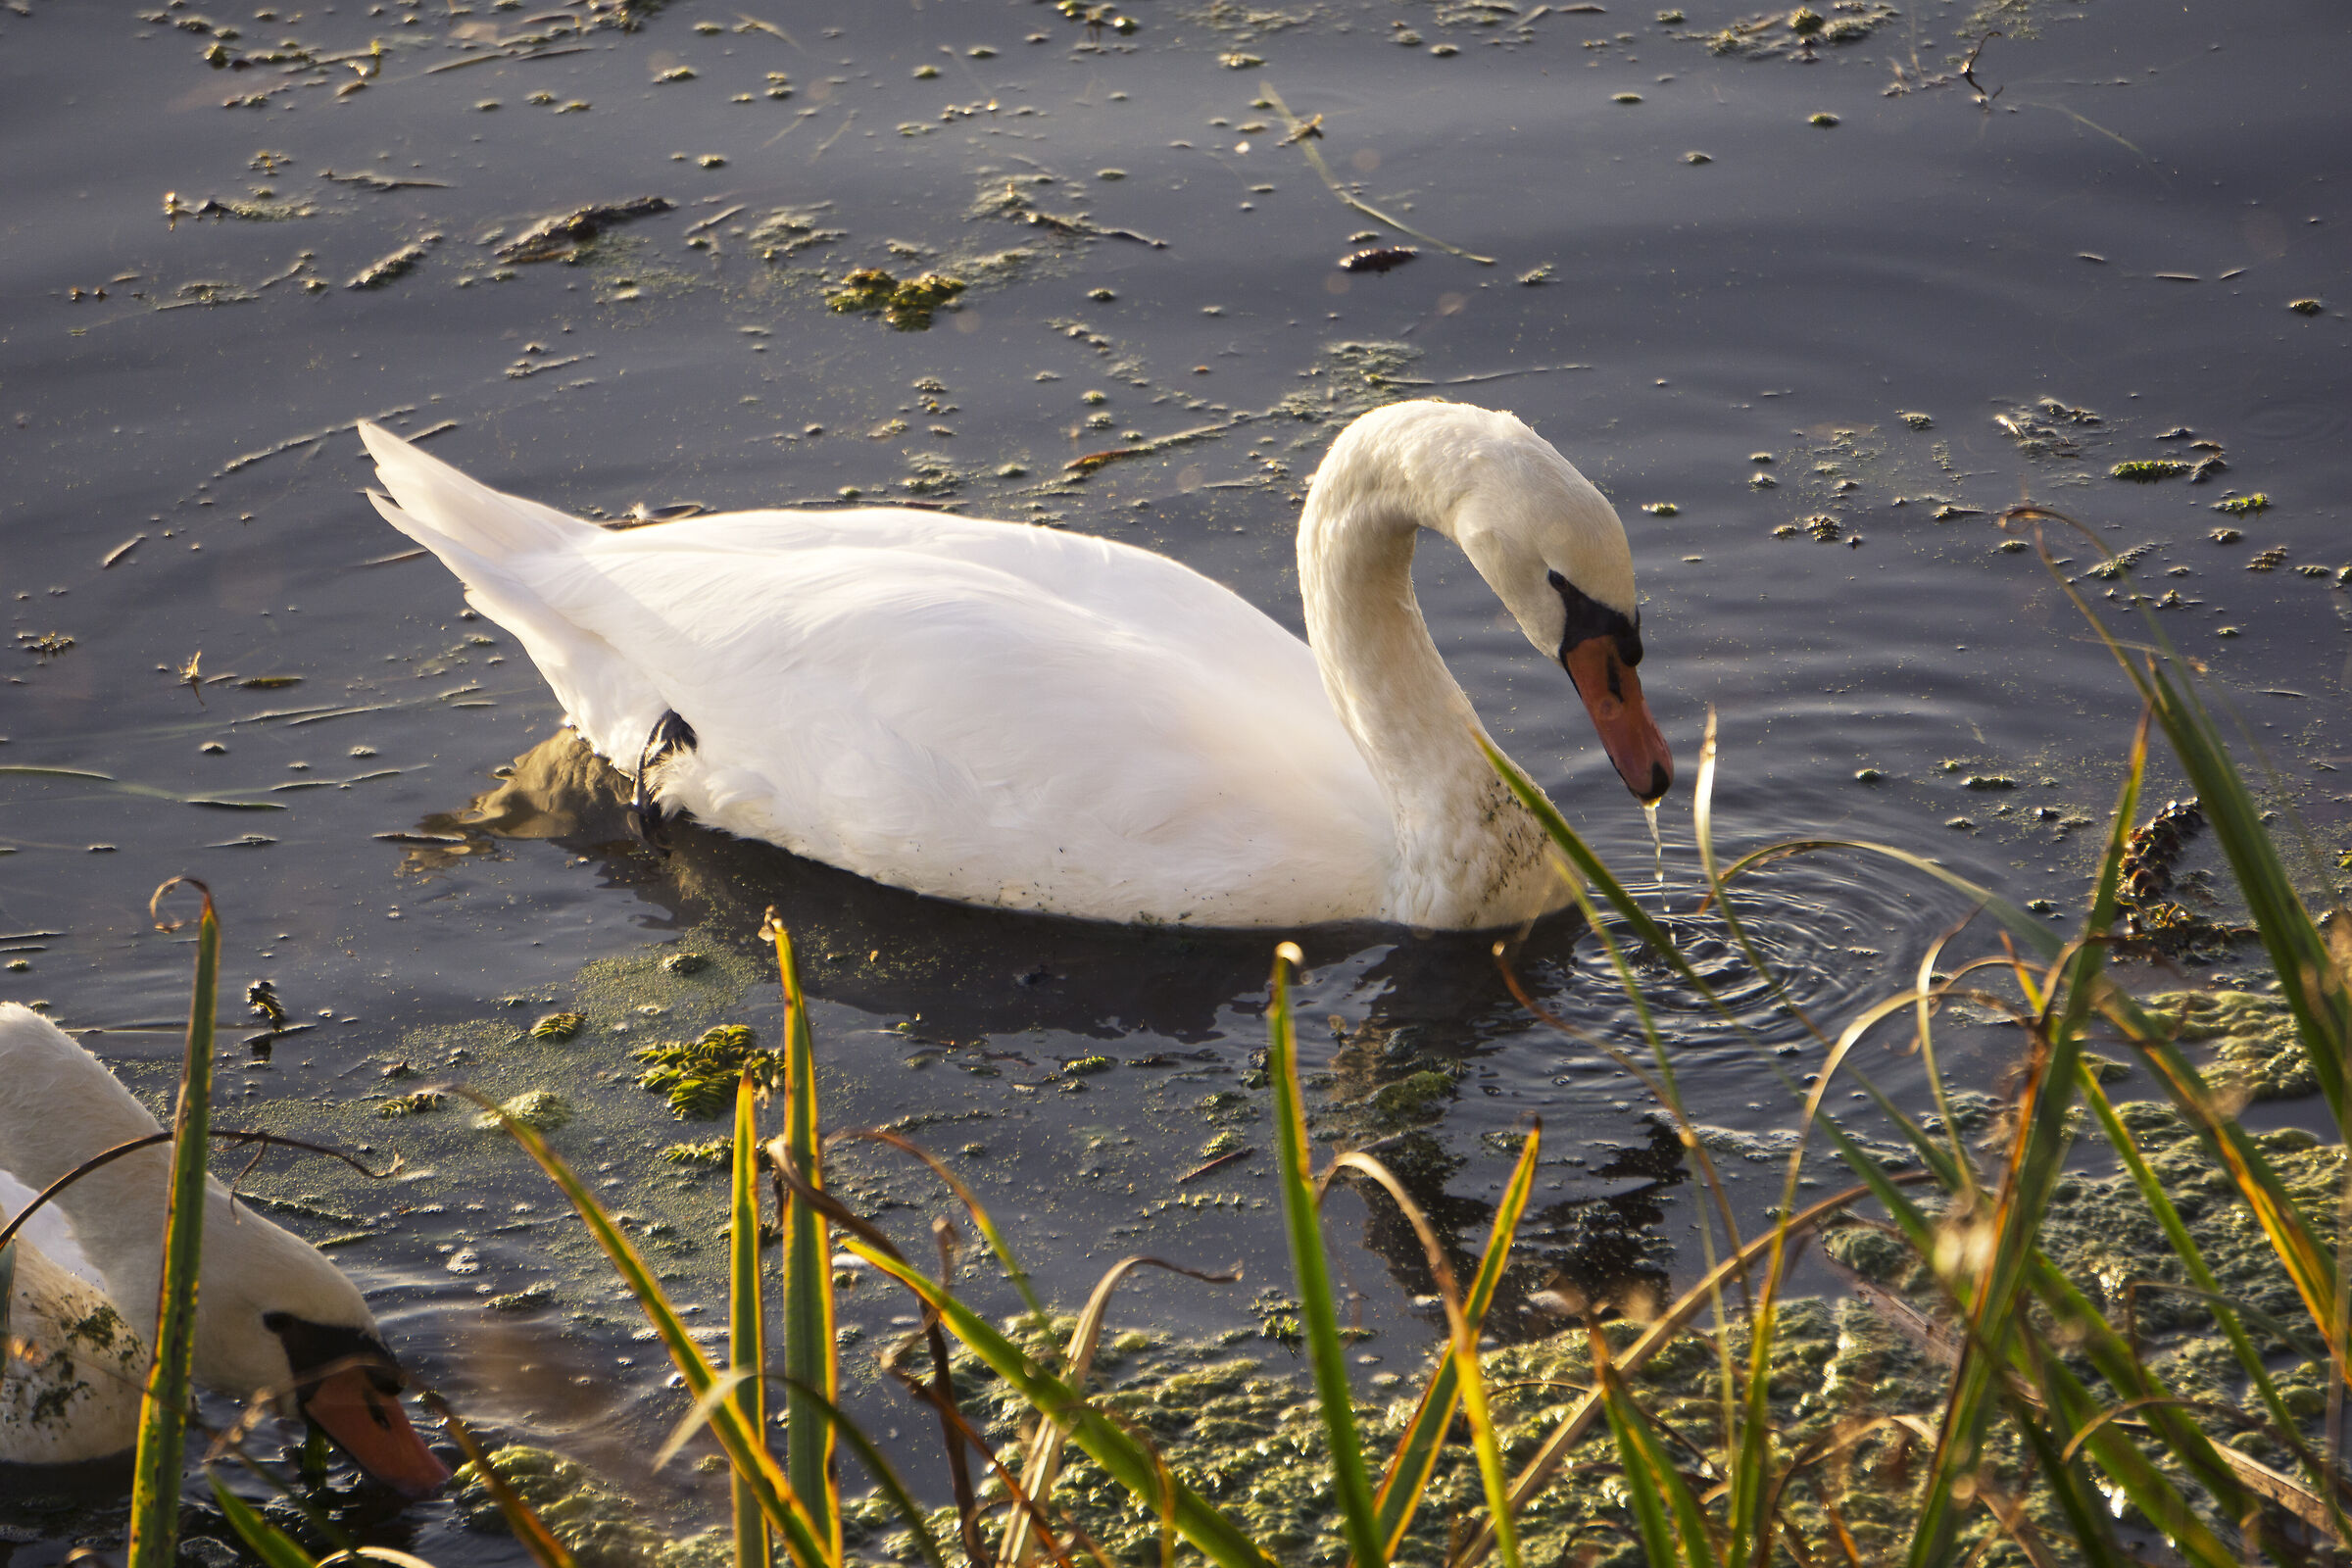 The swan feeds among the reeds...